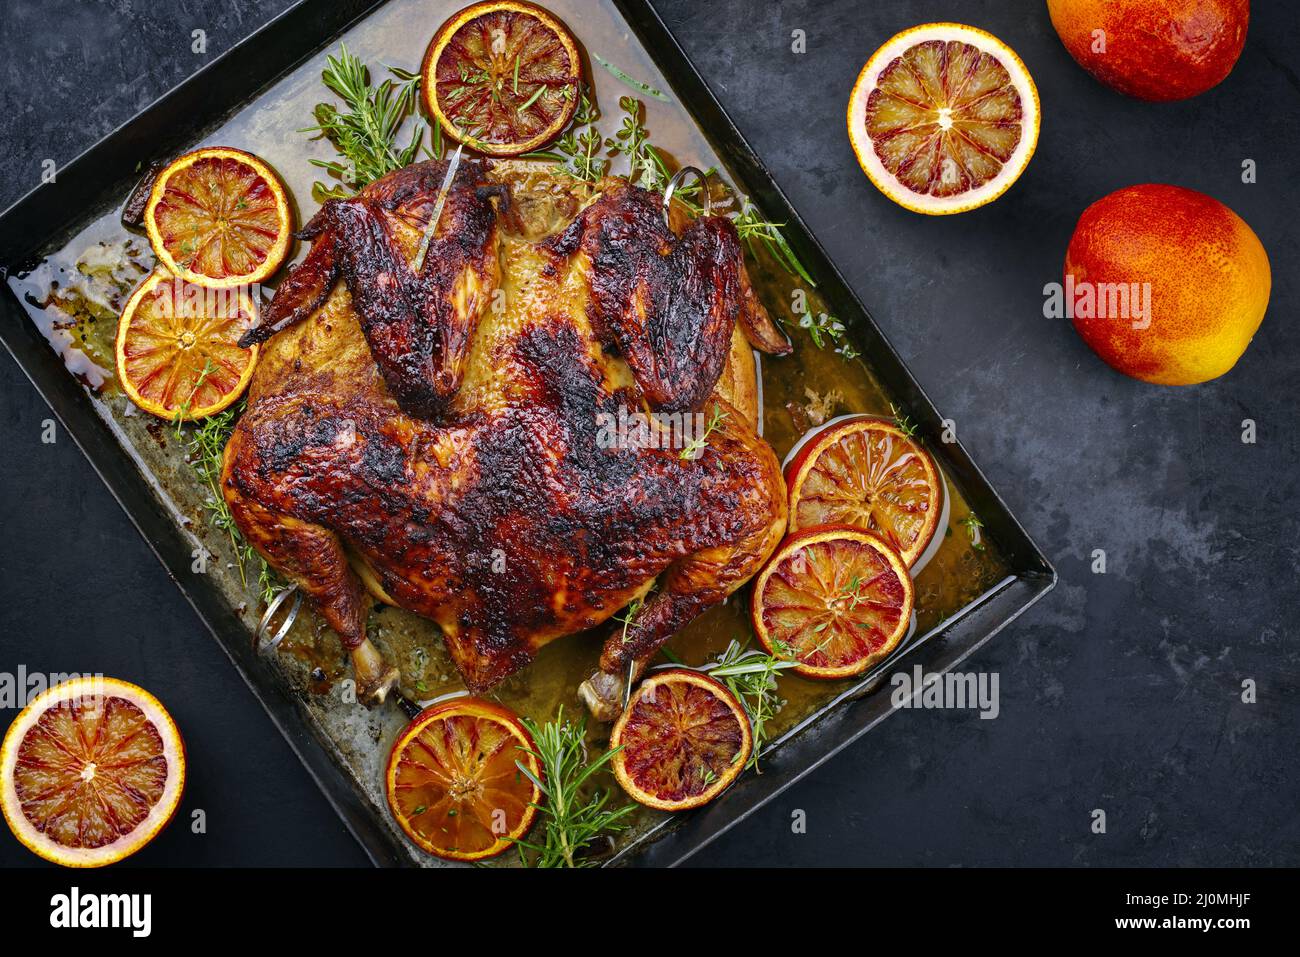 Traditional barbecue spatchcocked chicken al mattone chili with orange slices and herbs served as top view on an old rustic meta Stock Photo